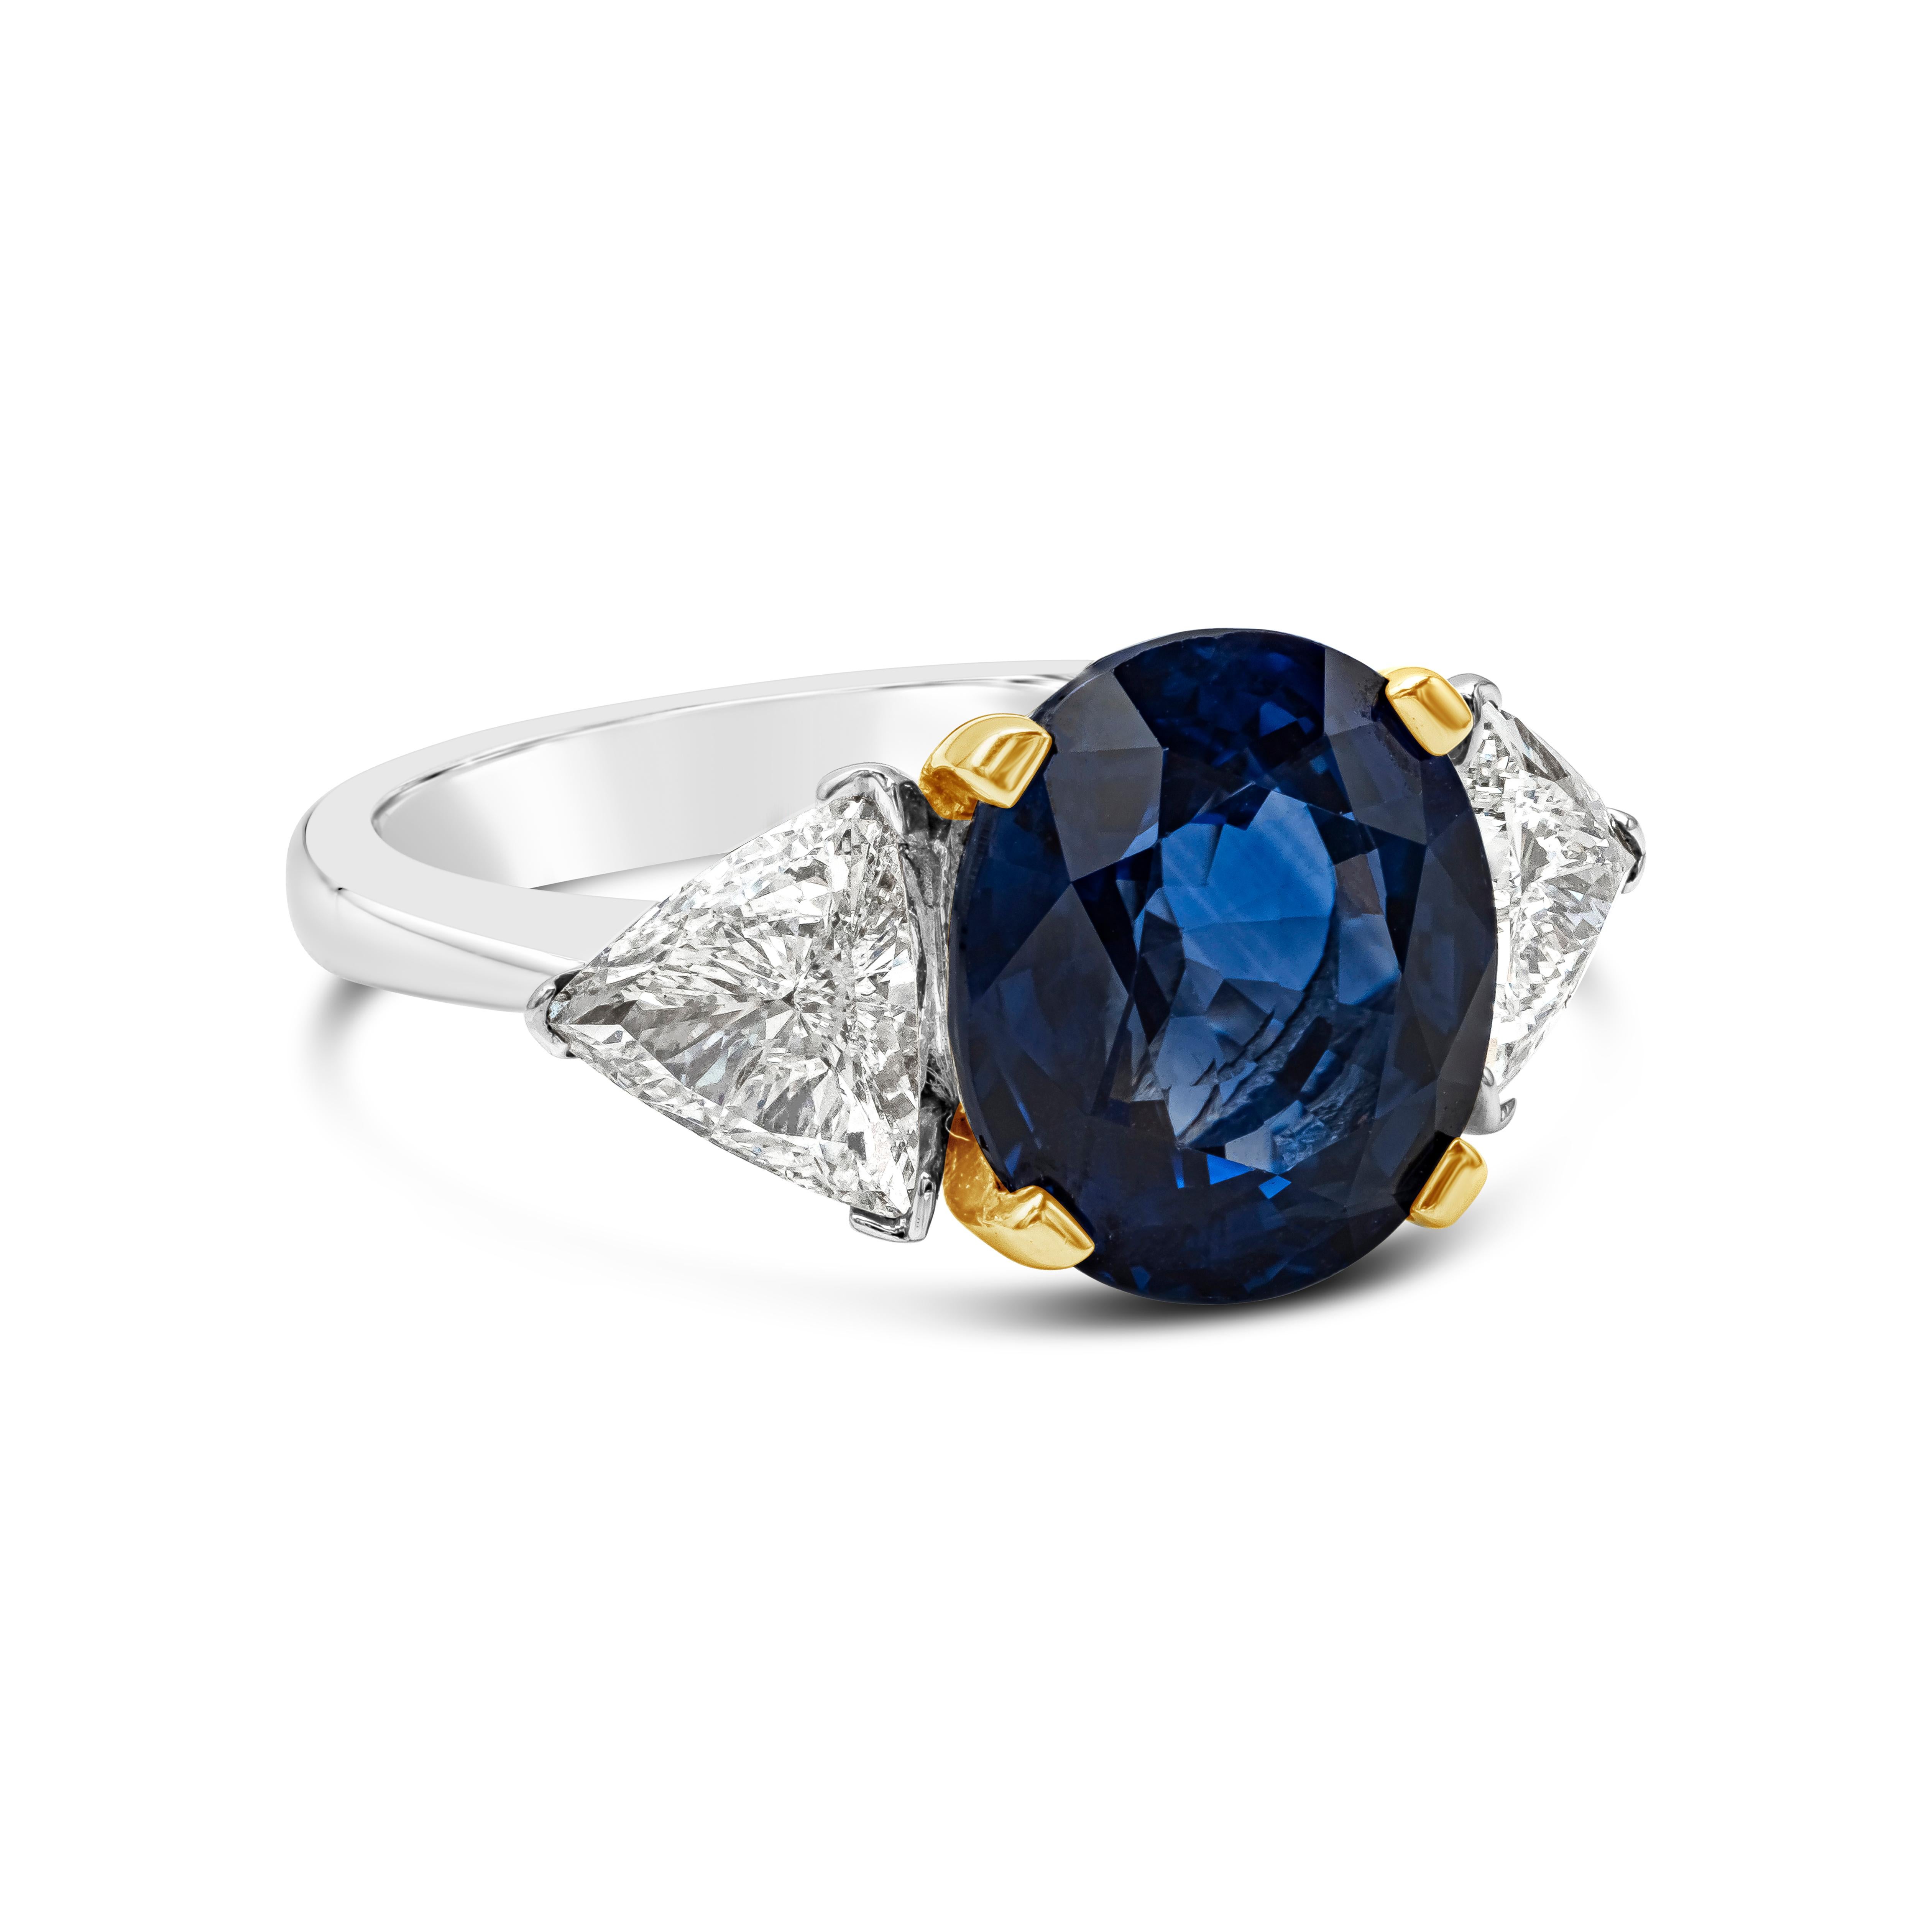 This color-rich and brilliant three-stone engagement ring features a color-rich 5.28 carats oval cut blue sapphire originated from Sri Lanka. Set in a classic four prong 18k yellow gold basket setting. Flanked by two trillion diamonds on either side